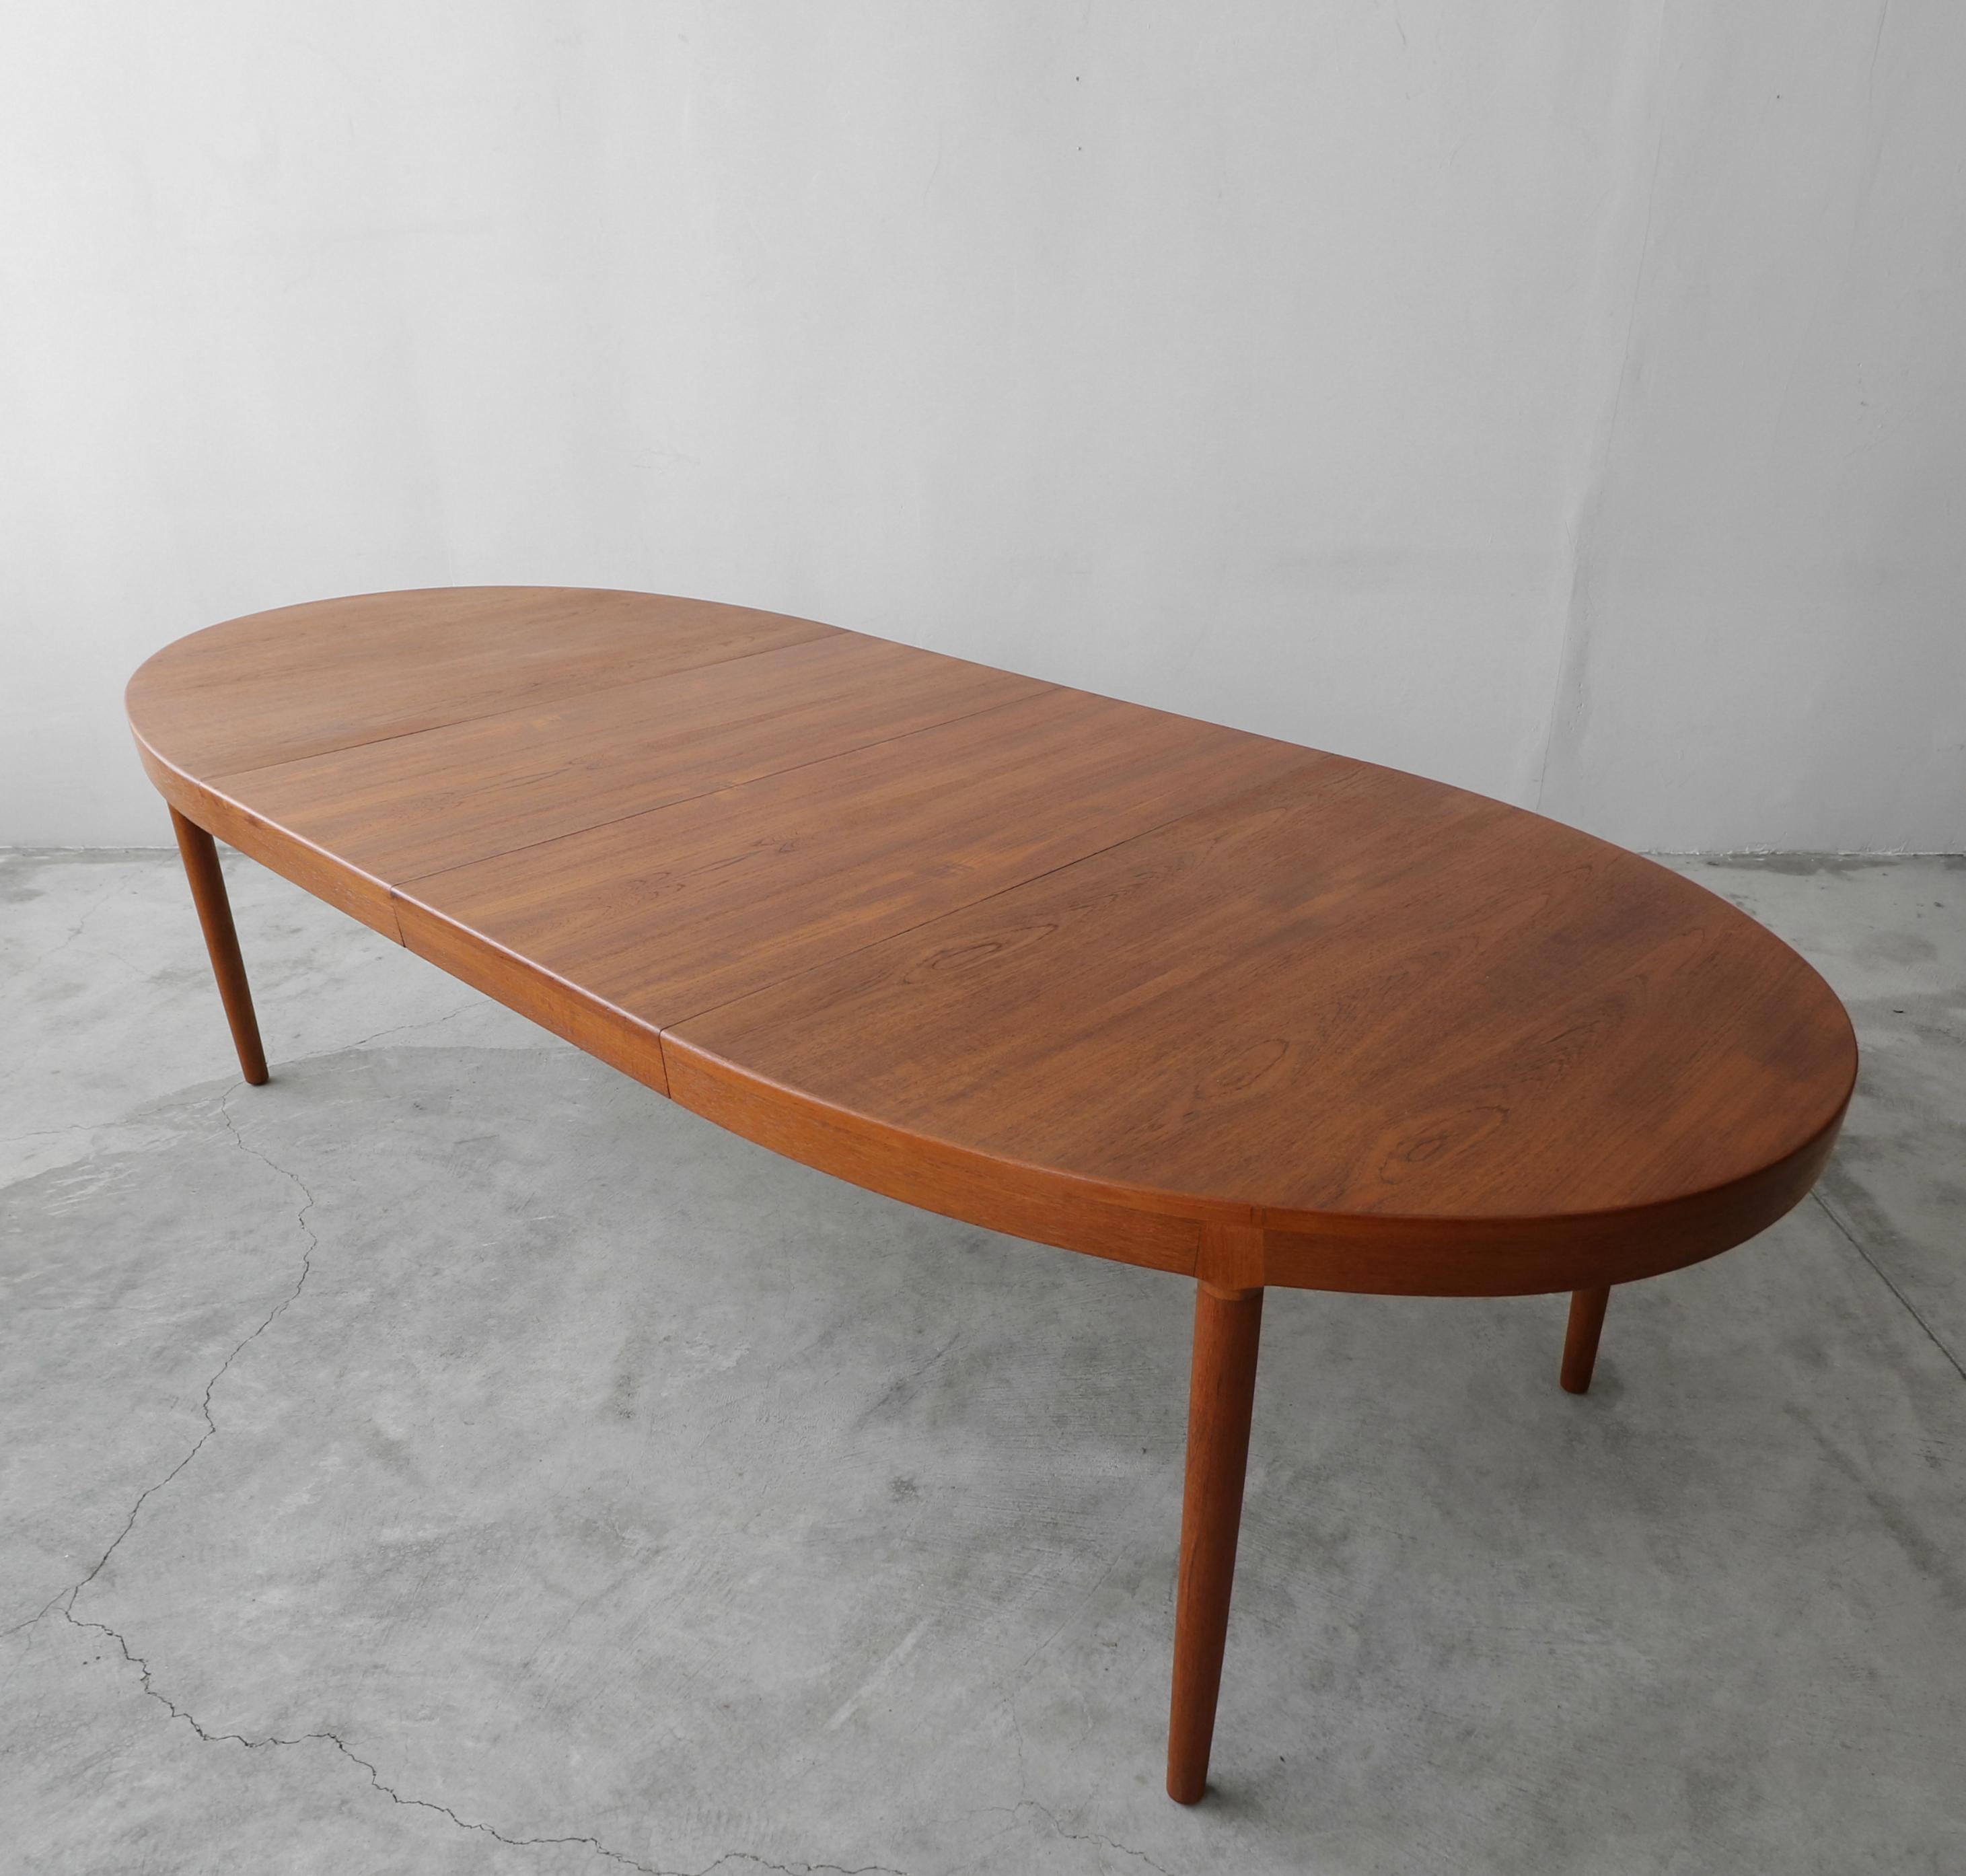 This a beautiful oval shaped Danish teak dining table by Harry Ostergaard for A/S Randers is both Classic in Danish design and very well made, with solid teak details. It has beautiful lines and gorgeous color. This table is a great size closed and